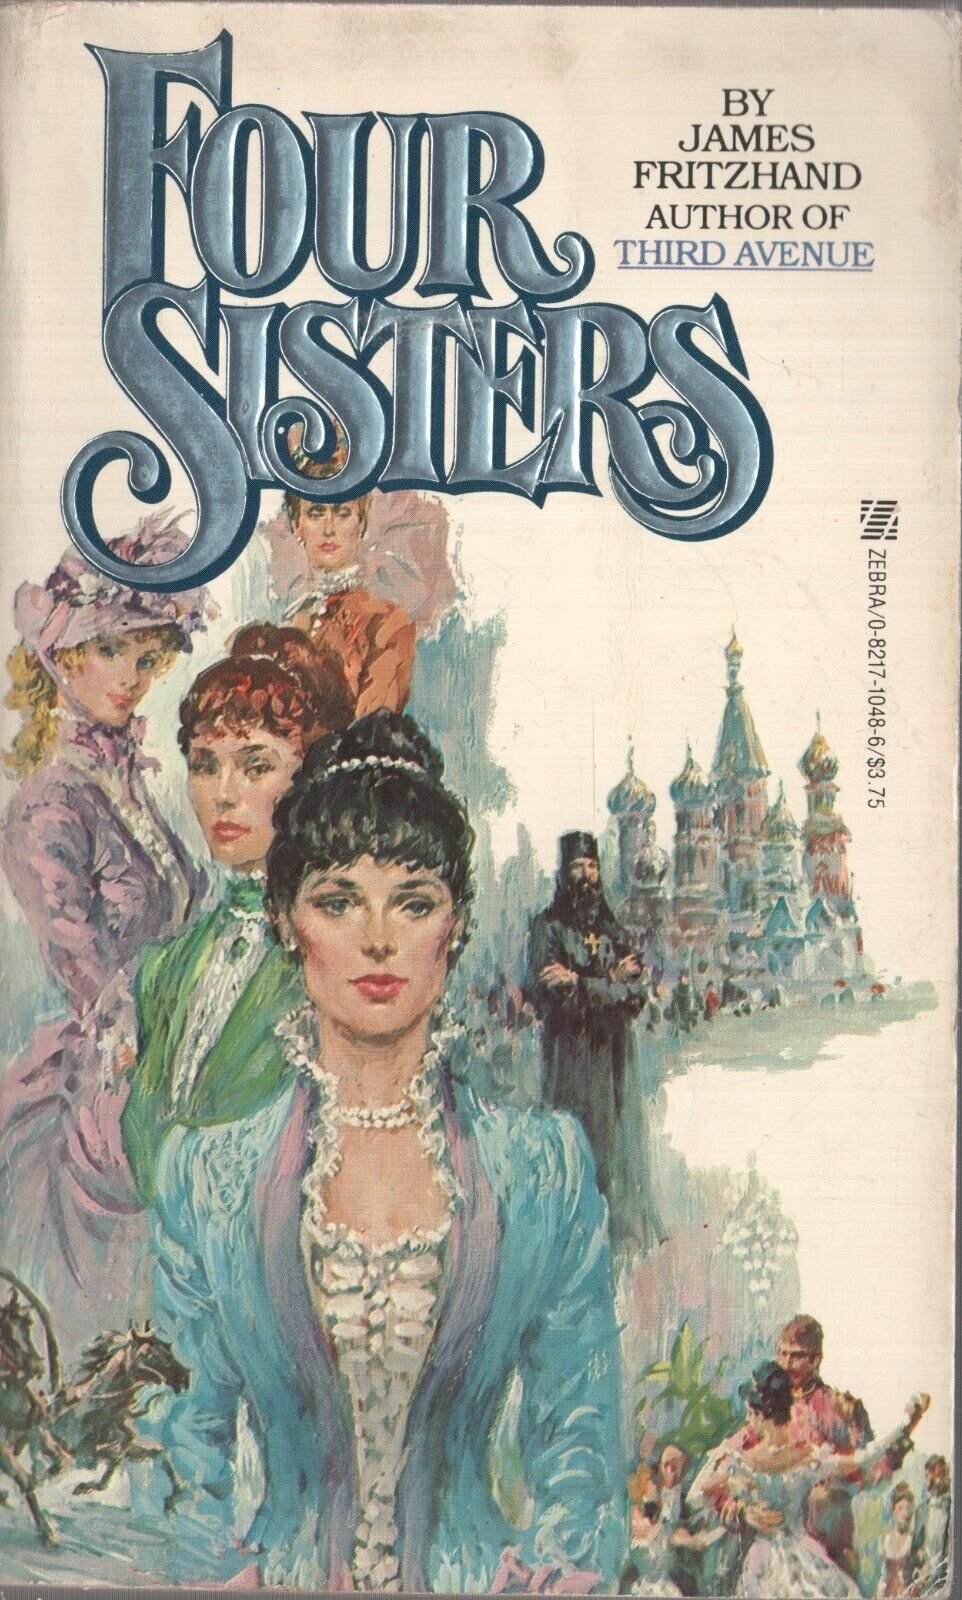 Four Sisters (August 1982)